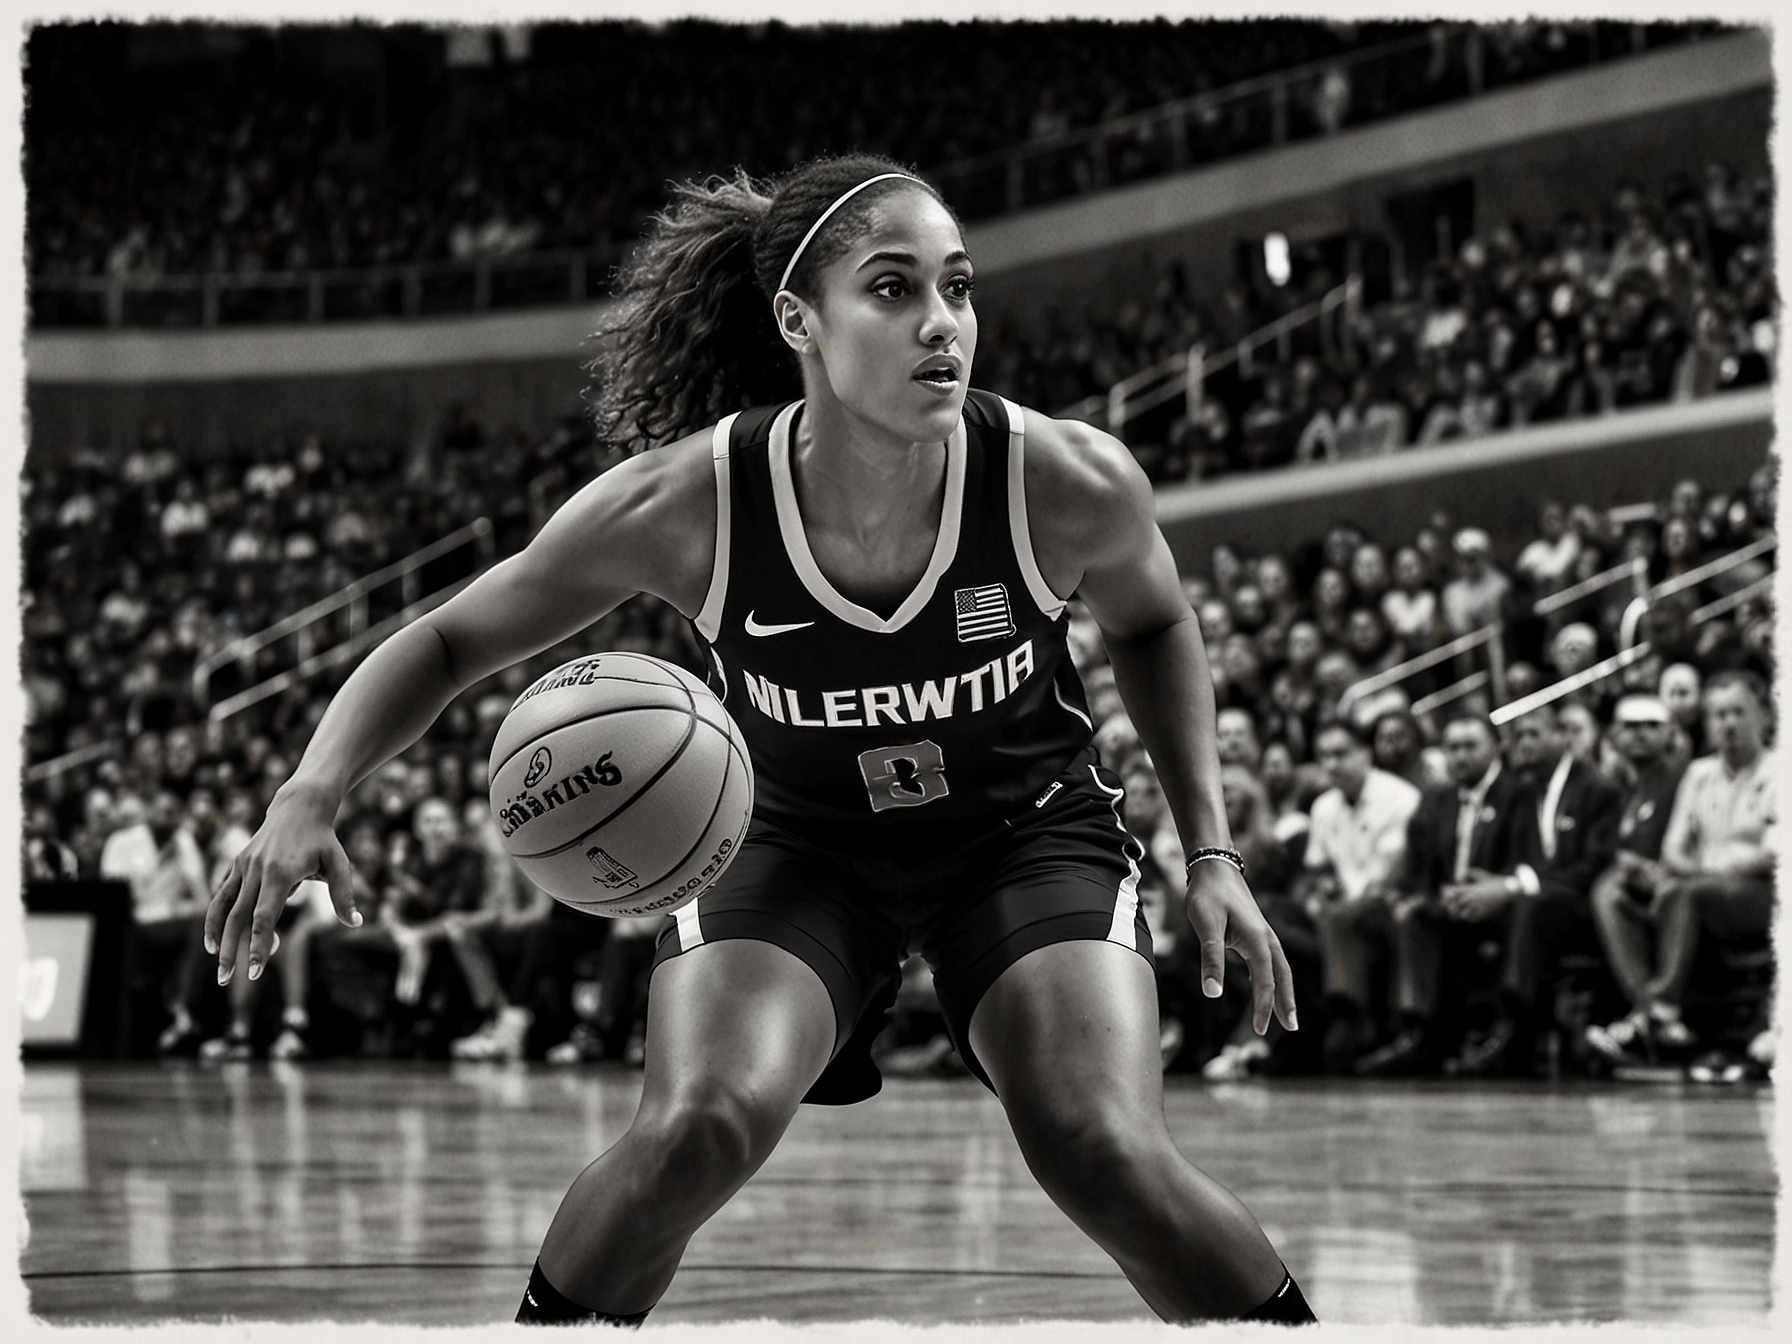 Skylar Diggins-Smith in action, delivering one of her eight crucial assists. Her keen court vision and quick decision-making are evident as she maneuvers around the opposing team’s defense.